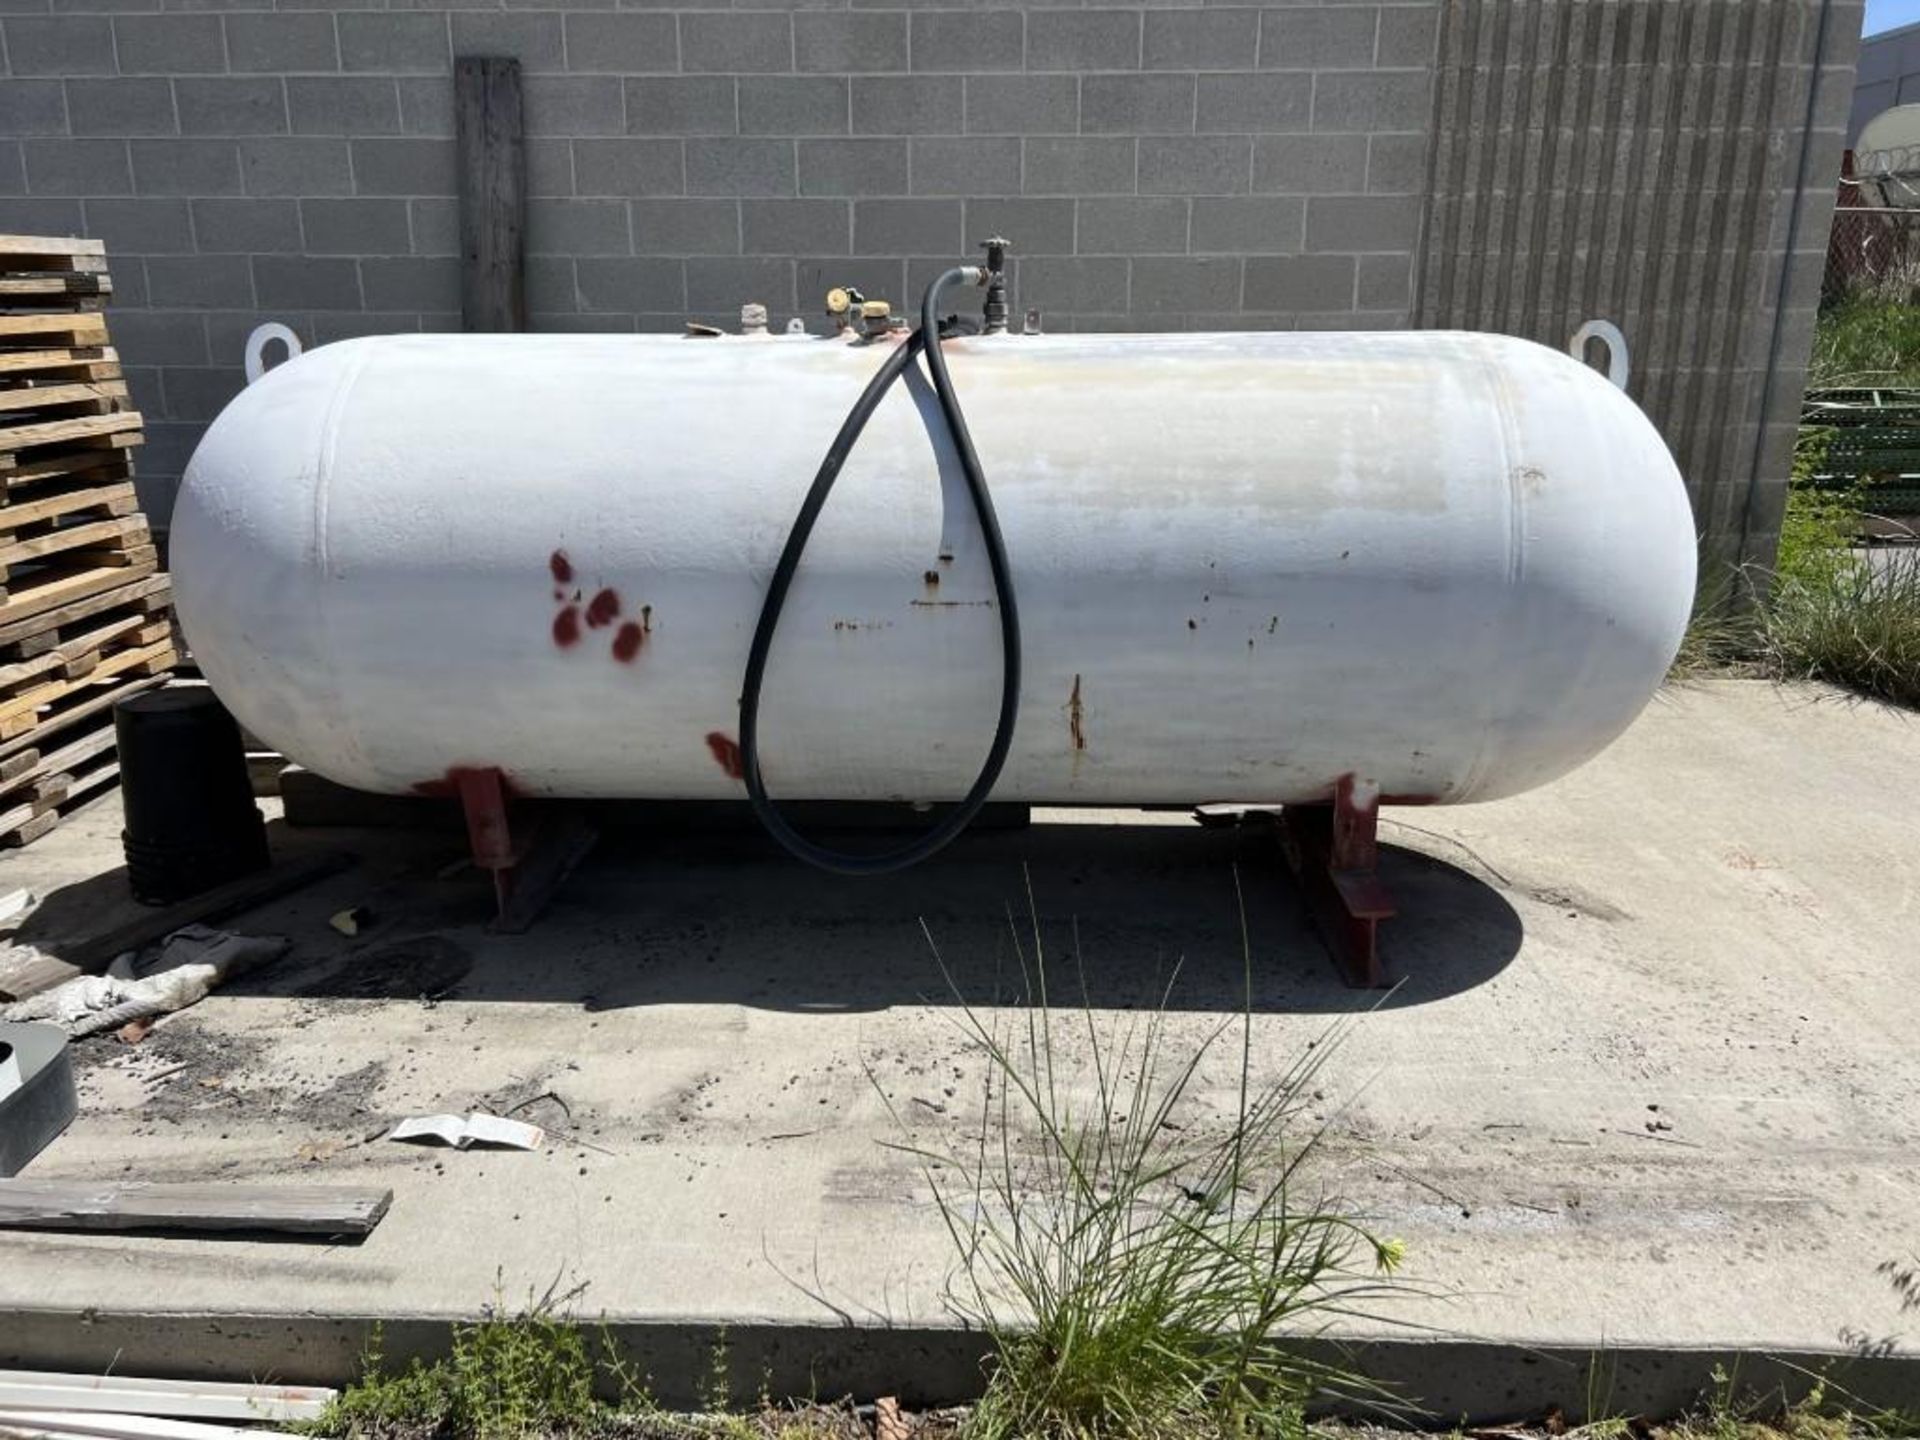 500 Gallon Propane Tank (located offsite at: Located at: 3785 W 1987 S. SLC, UT 84104 pick-up times